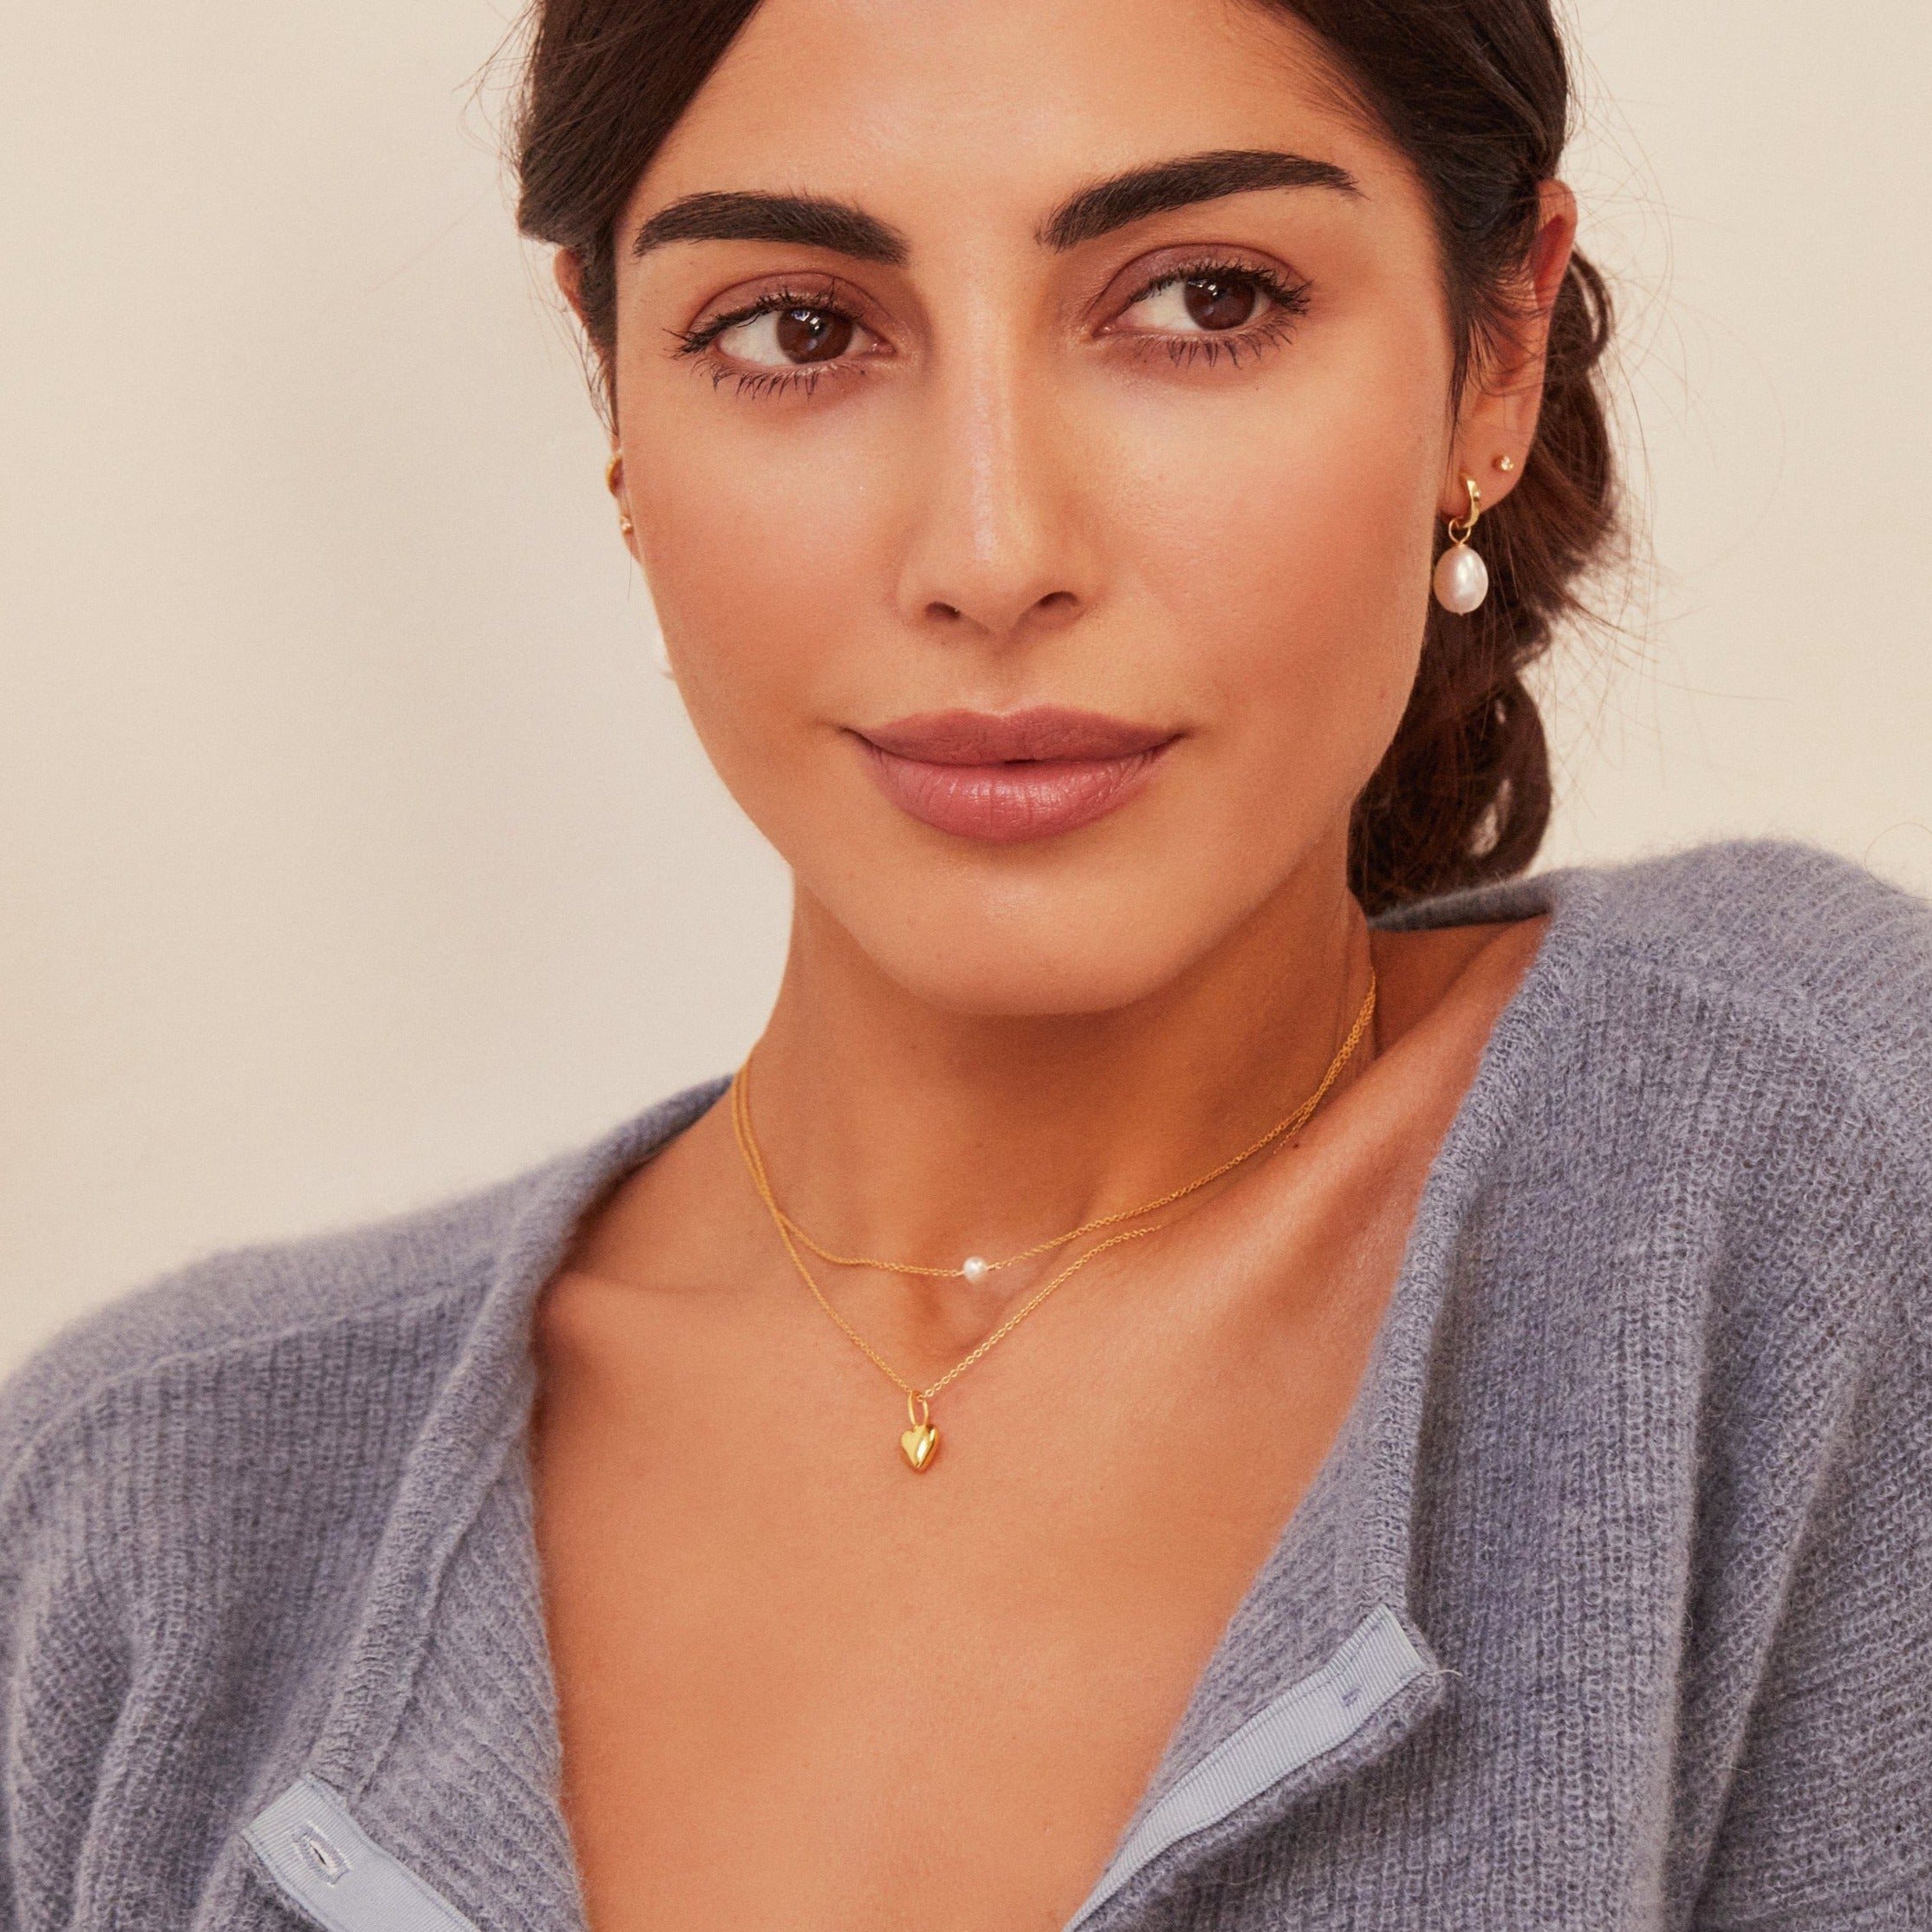 Gold heart pendant necklace around a brunette woman's neck layered with a diamond necklace also wearing a pearl earring and gold small diamond stud in her ear lobe and a grey knitted top